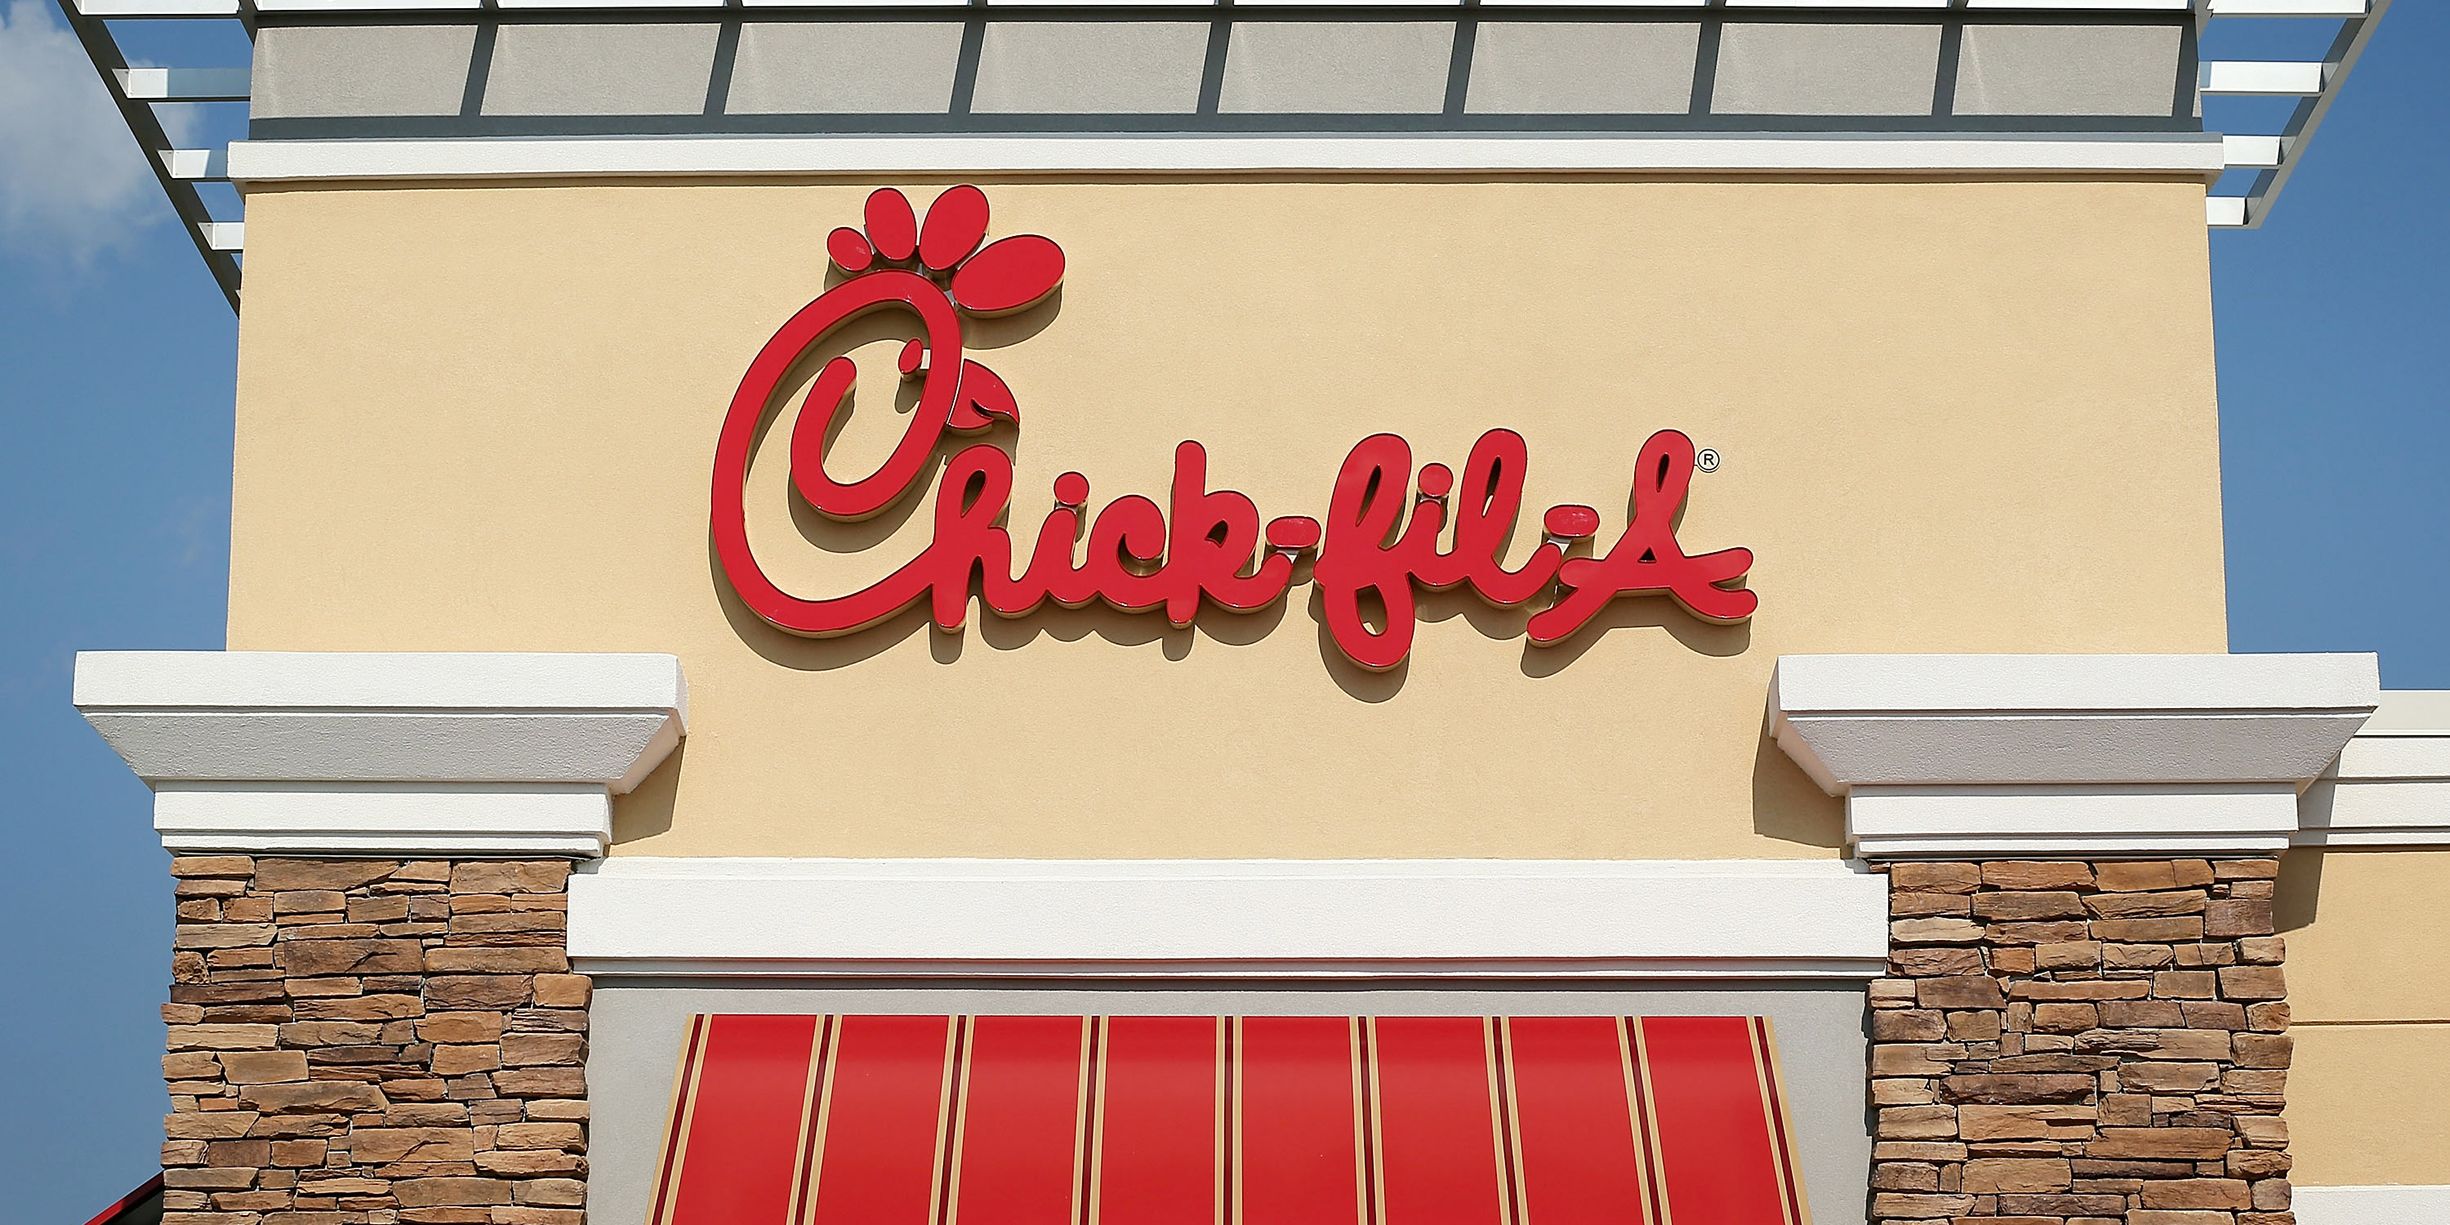 NextImg:After nearly 56 Years, Chick-fil-A just made a bittersweet announcement